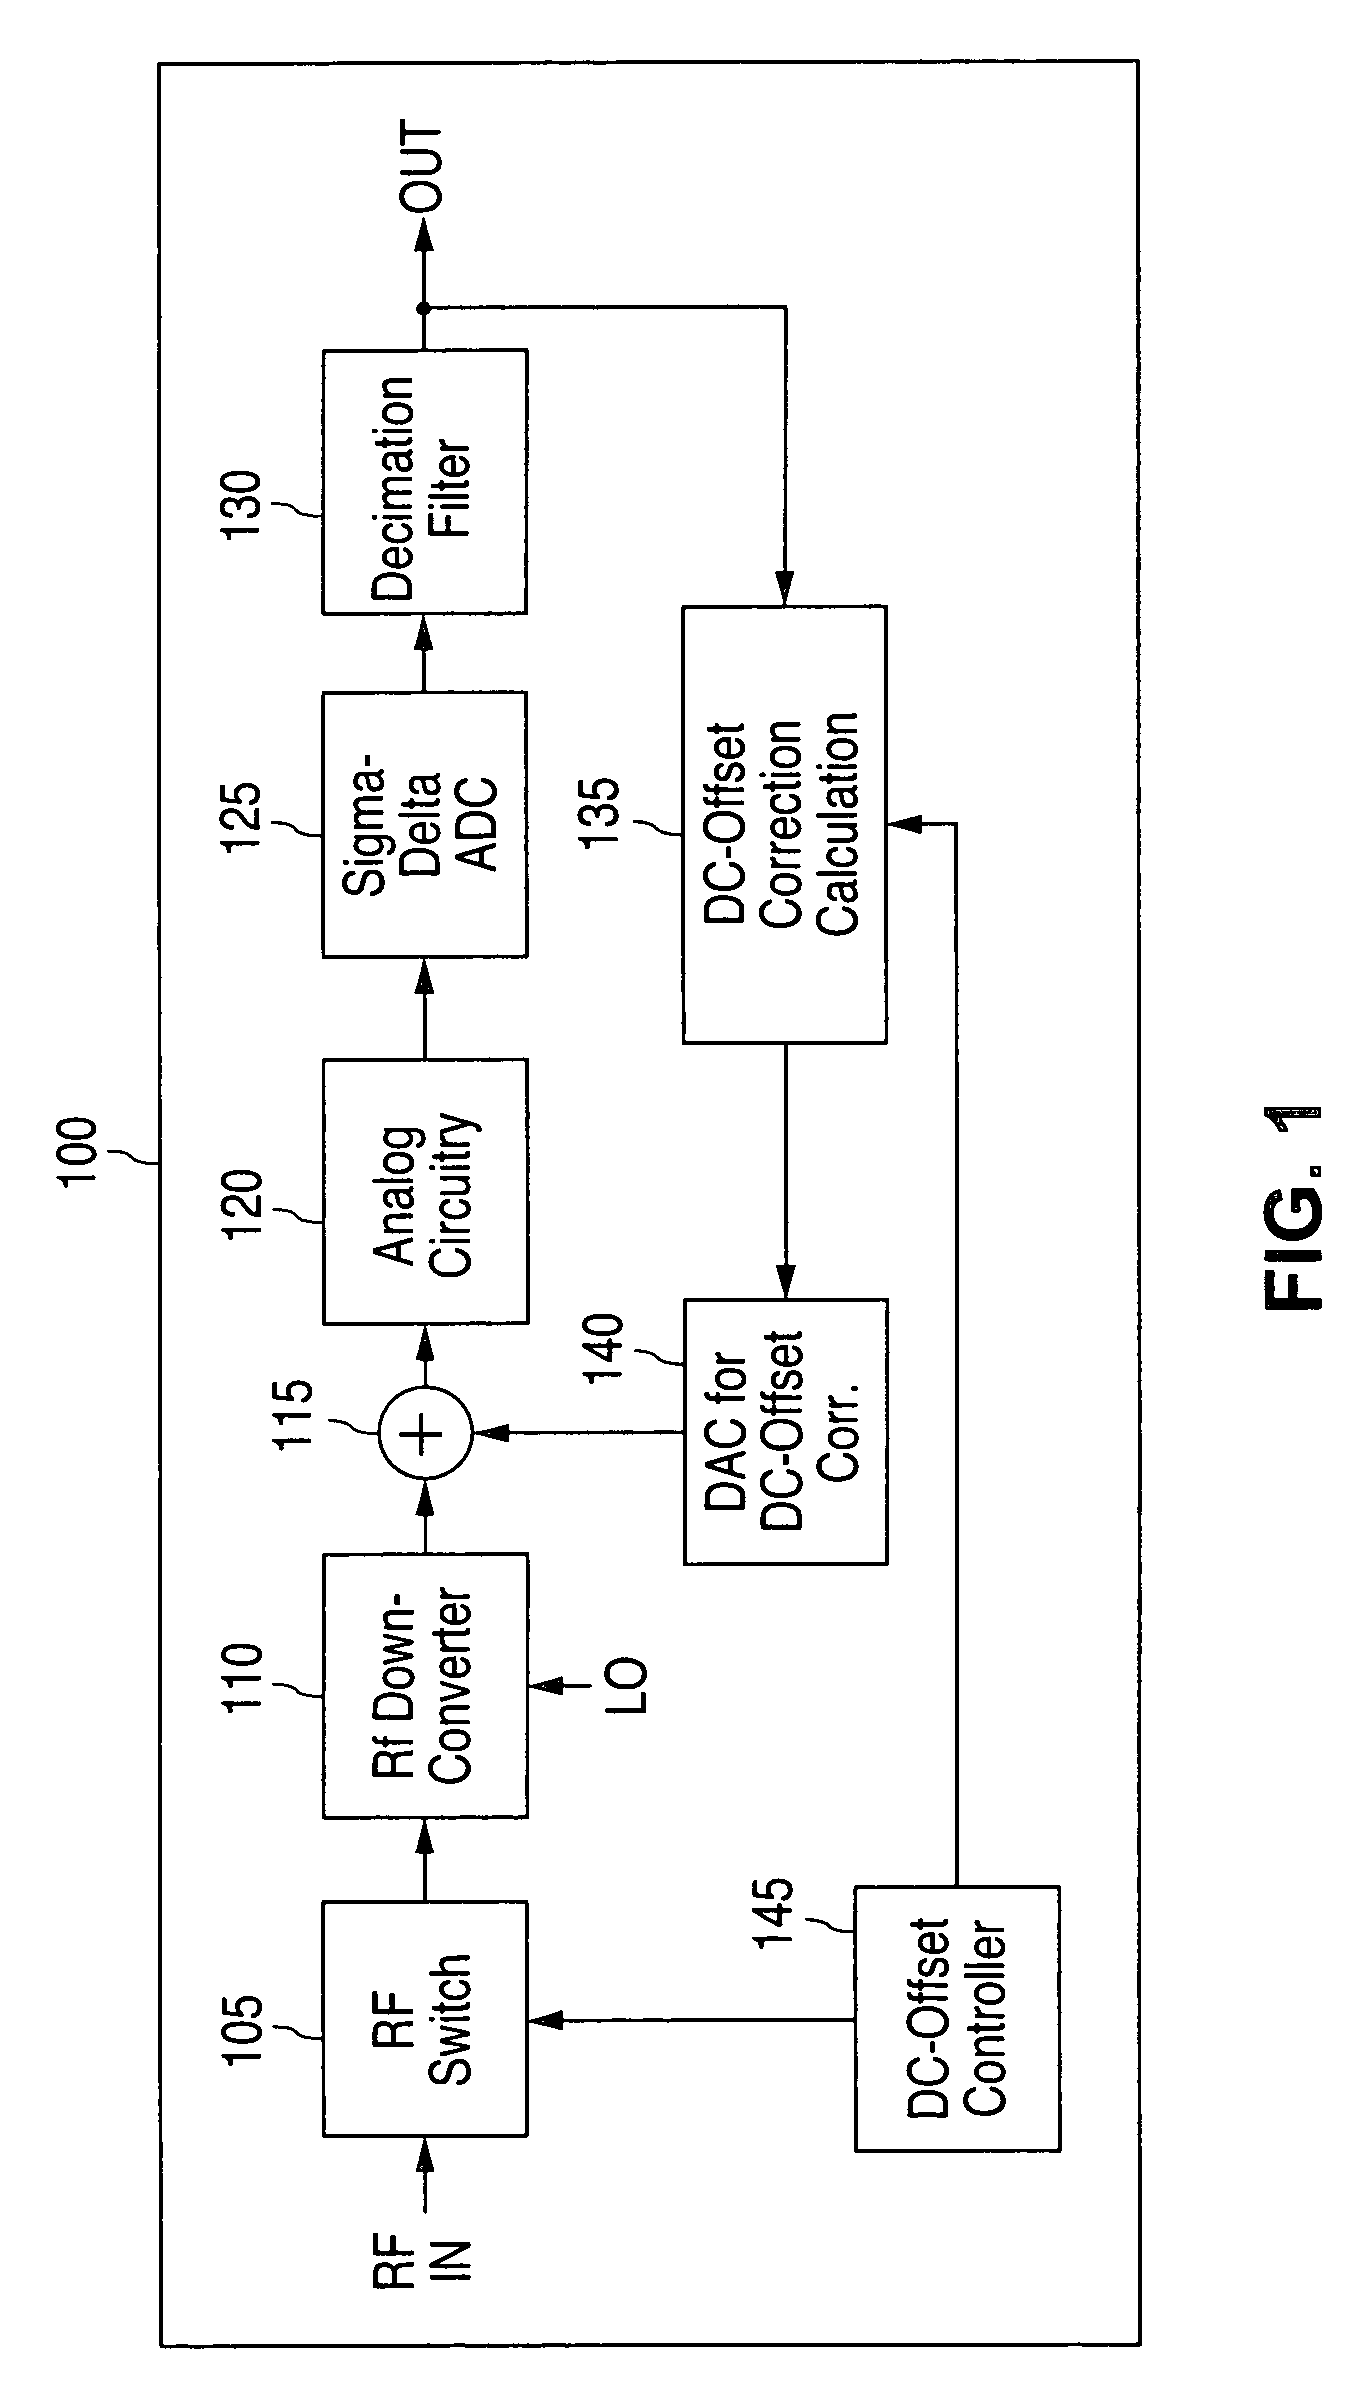 Digital DC-offset correction circuit for an RF receiver